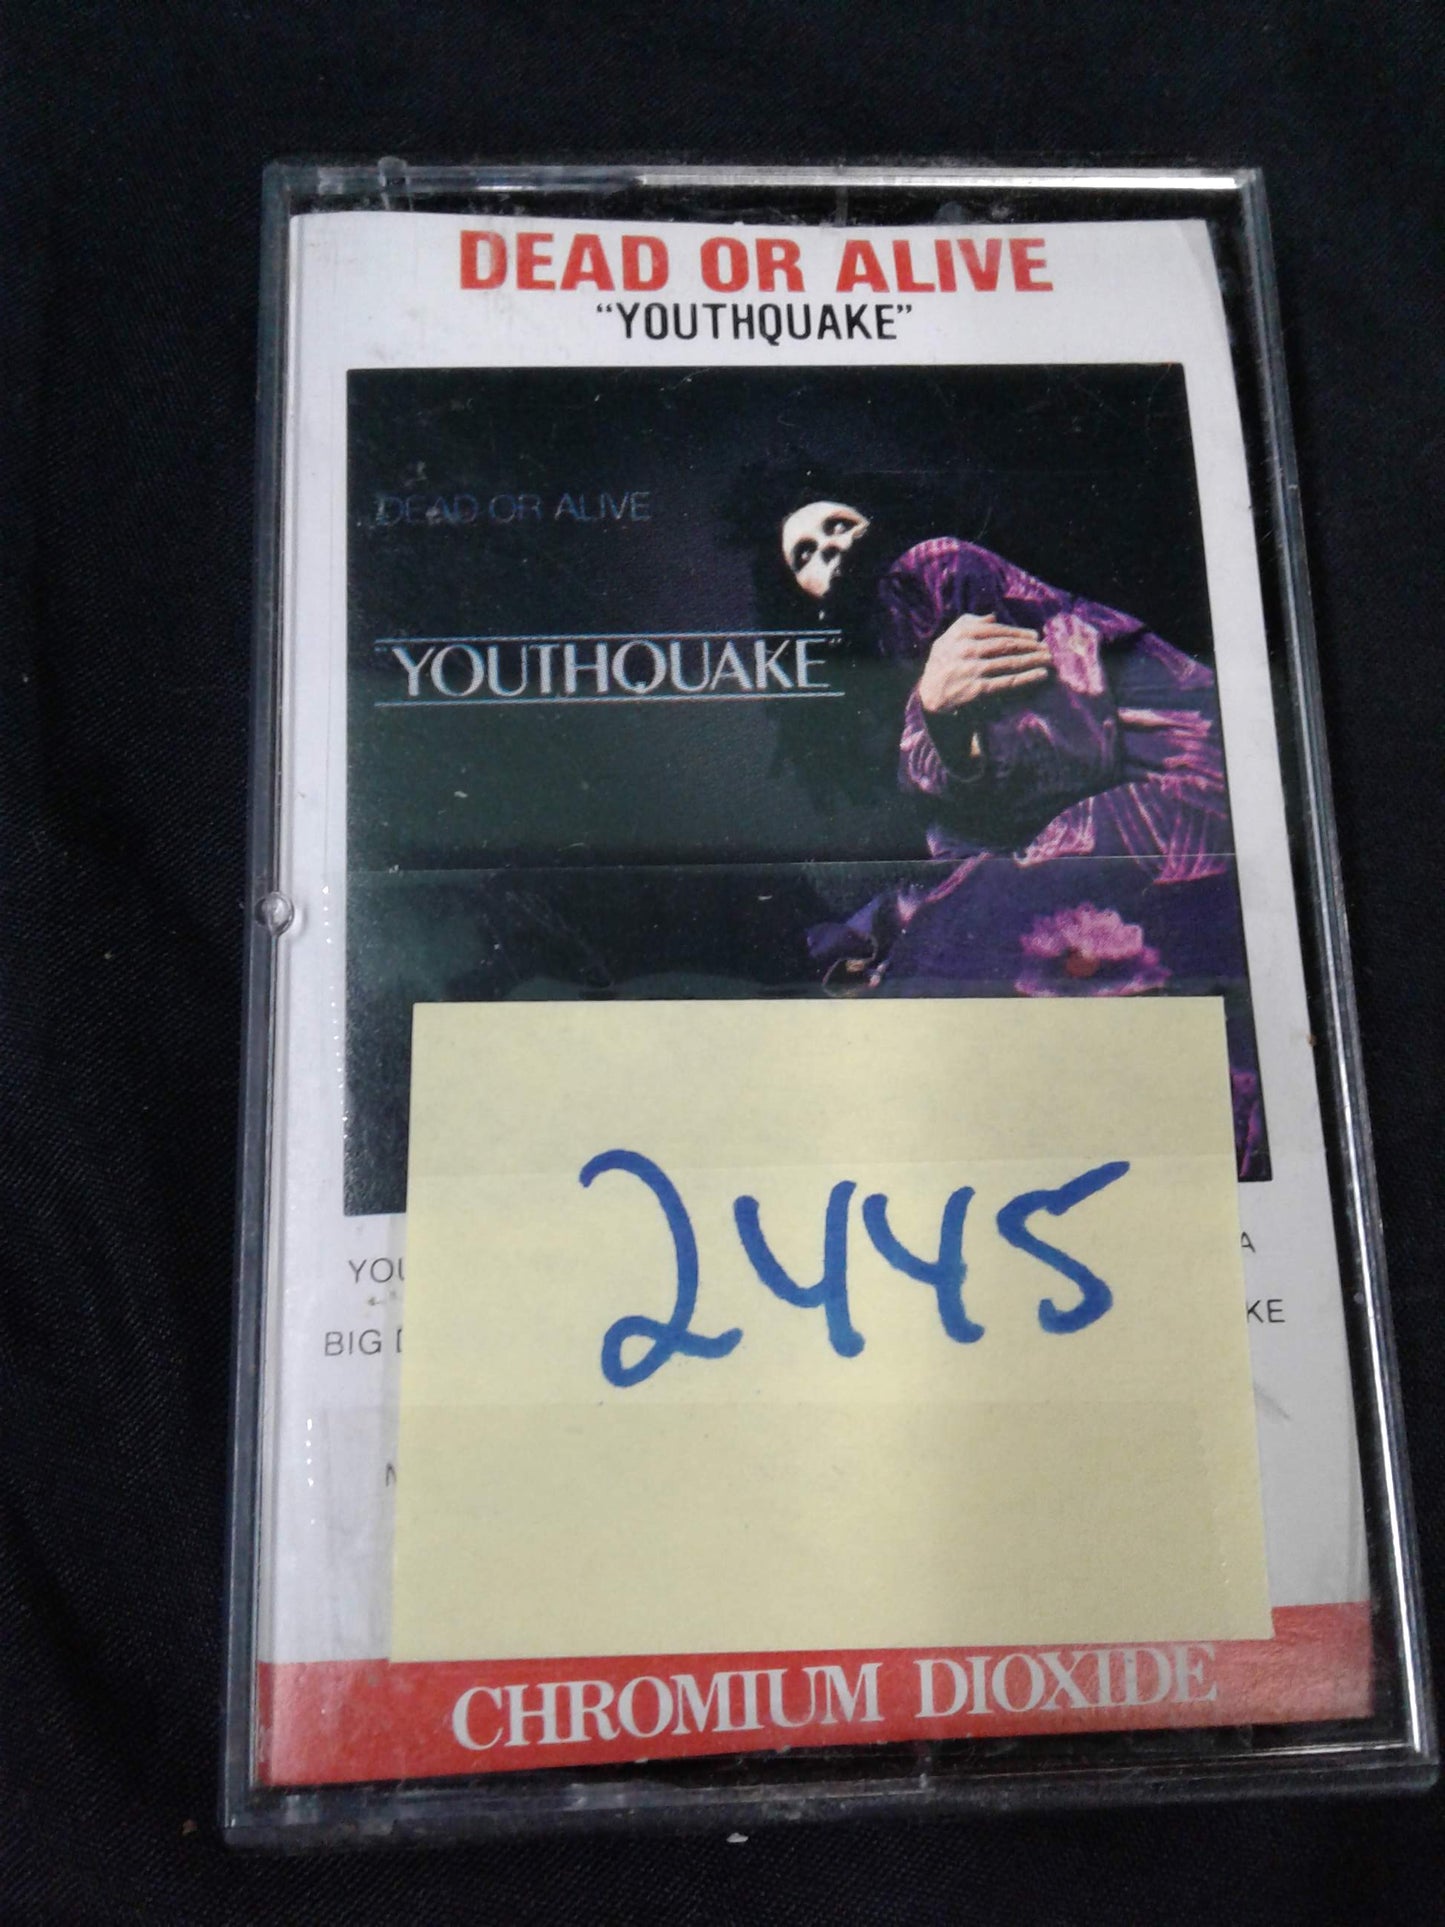 Cassette Dead of alive Youthquake